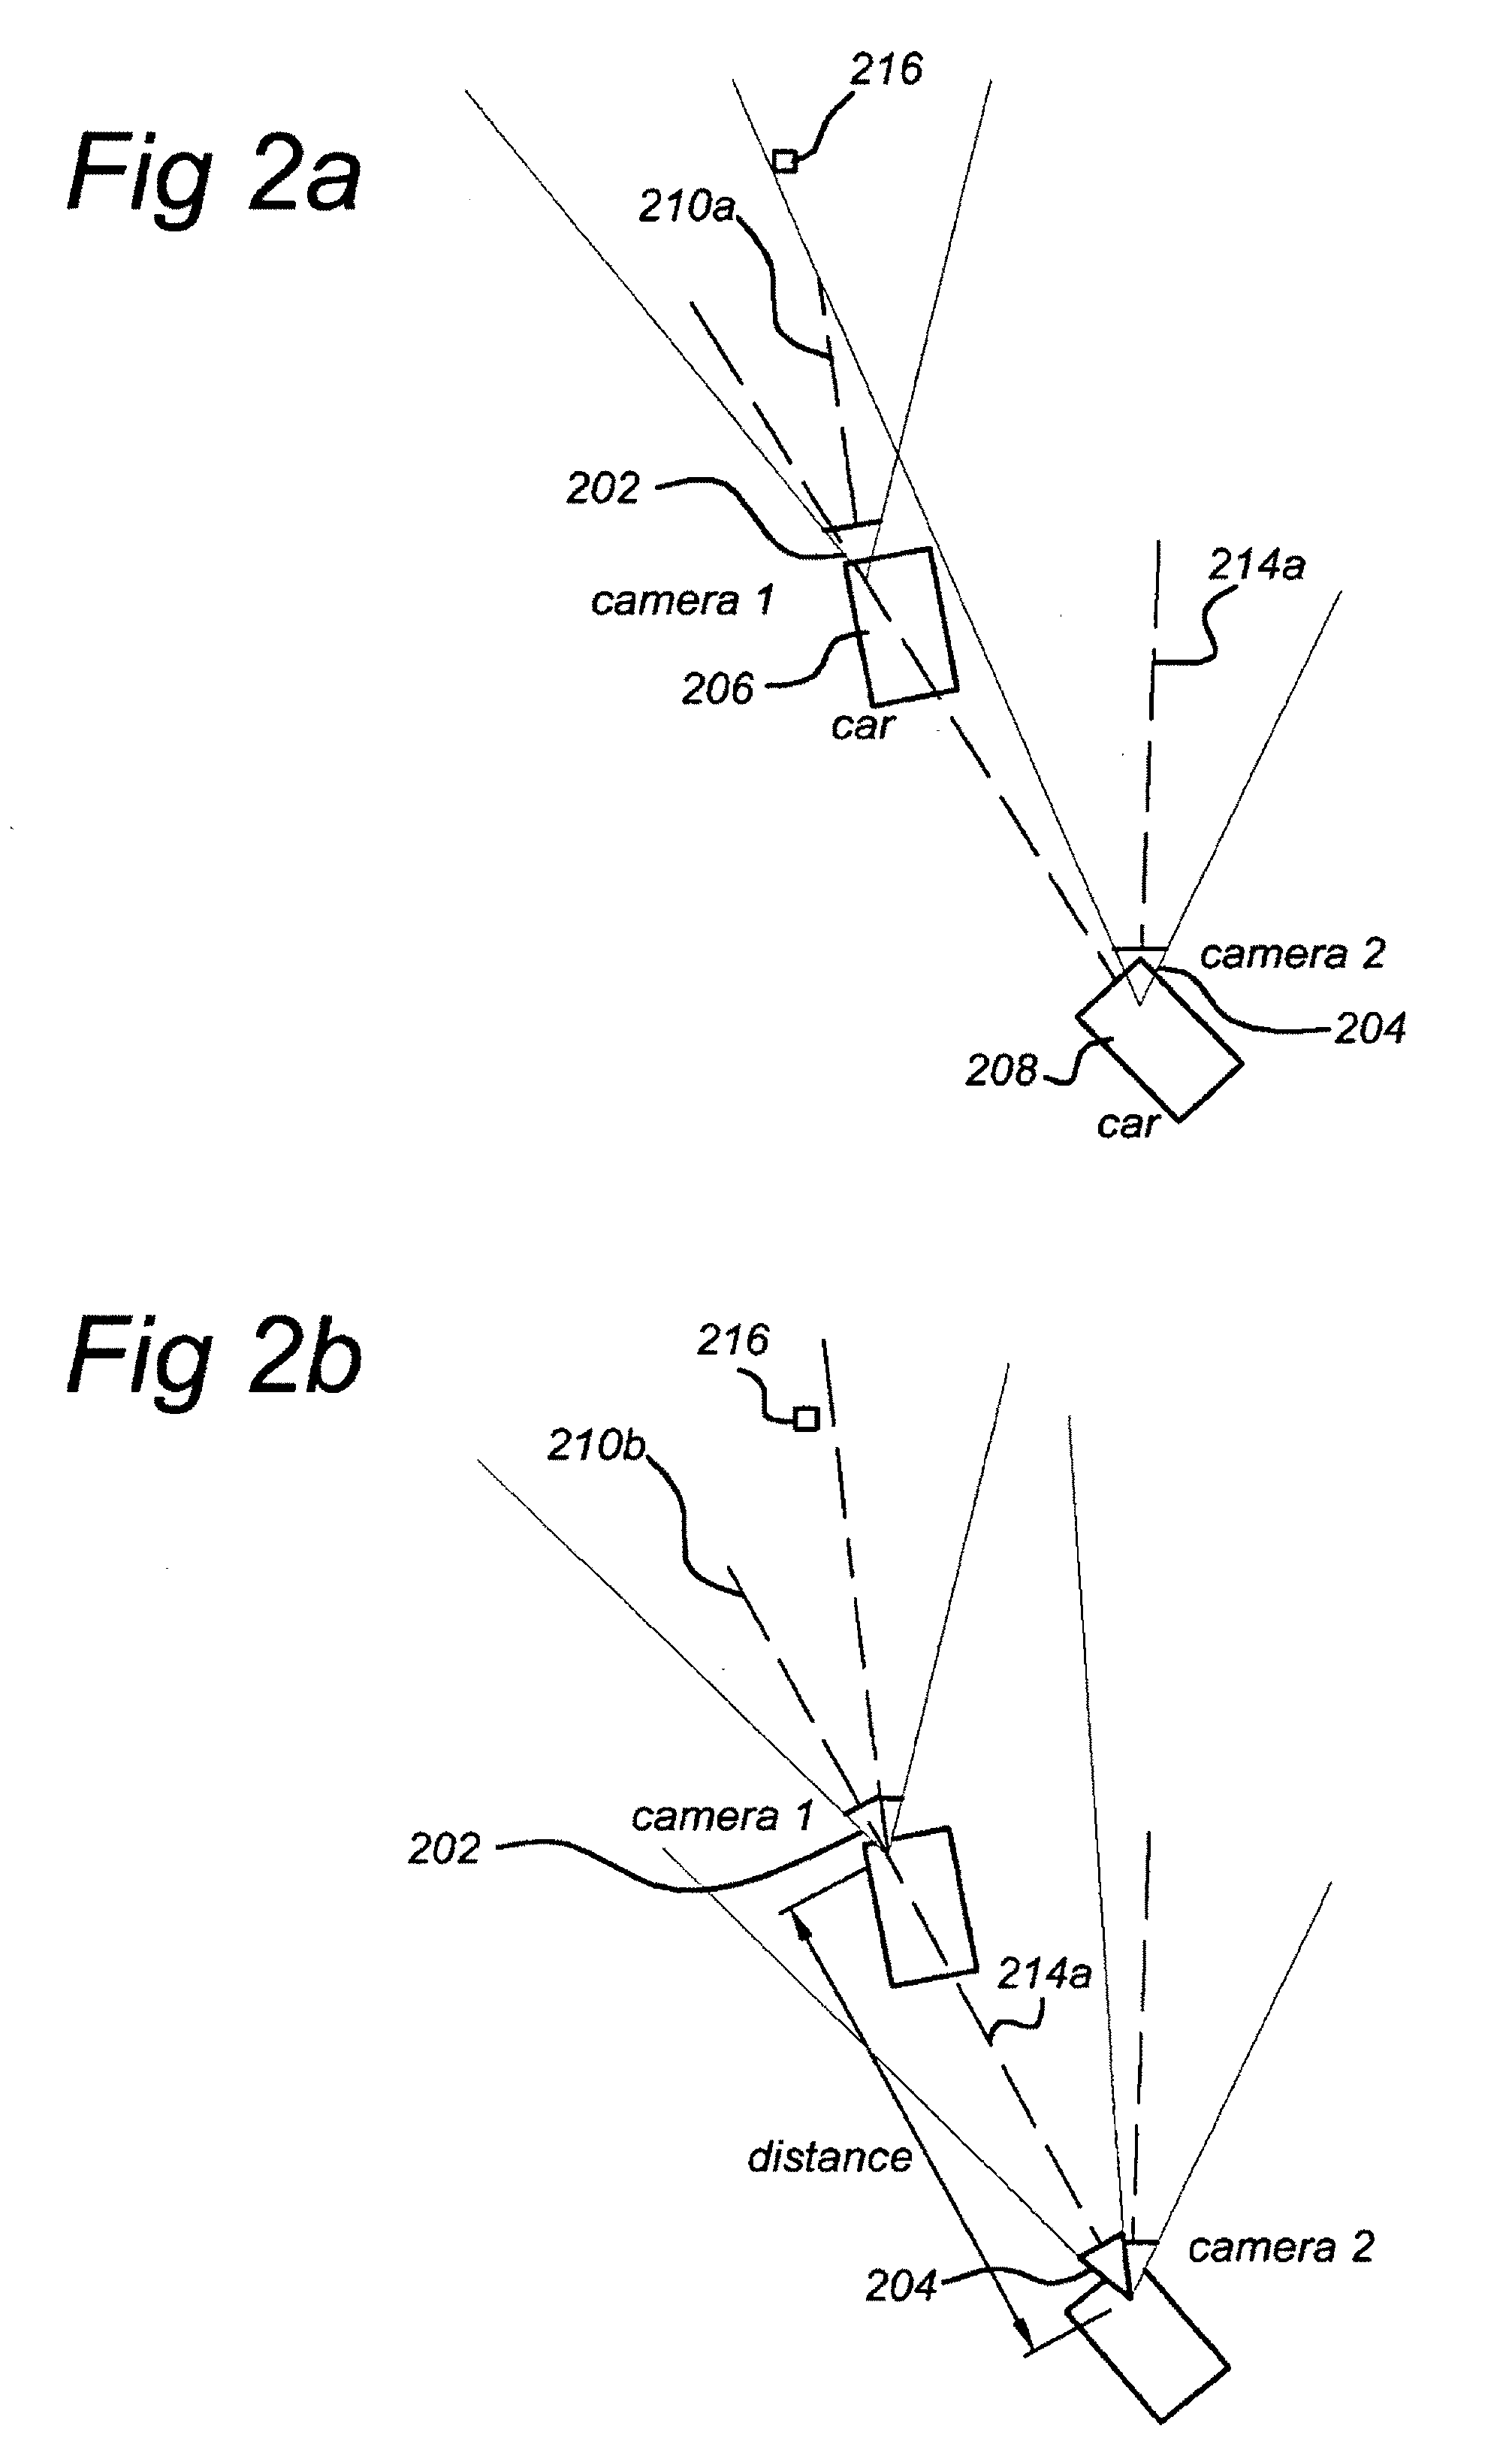 Method and apparatus for identification and position determination of planar objects in images